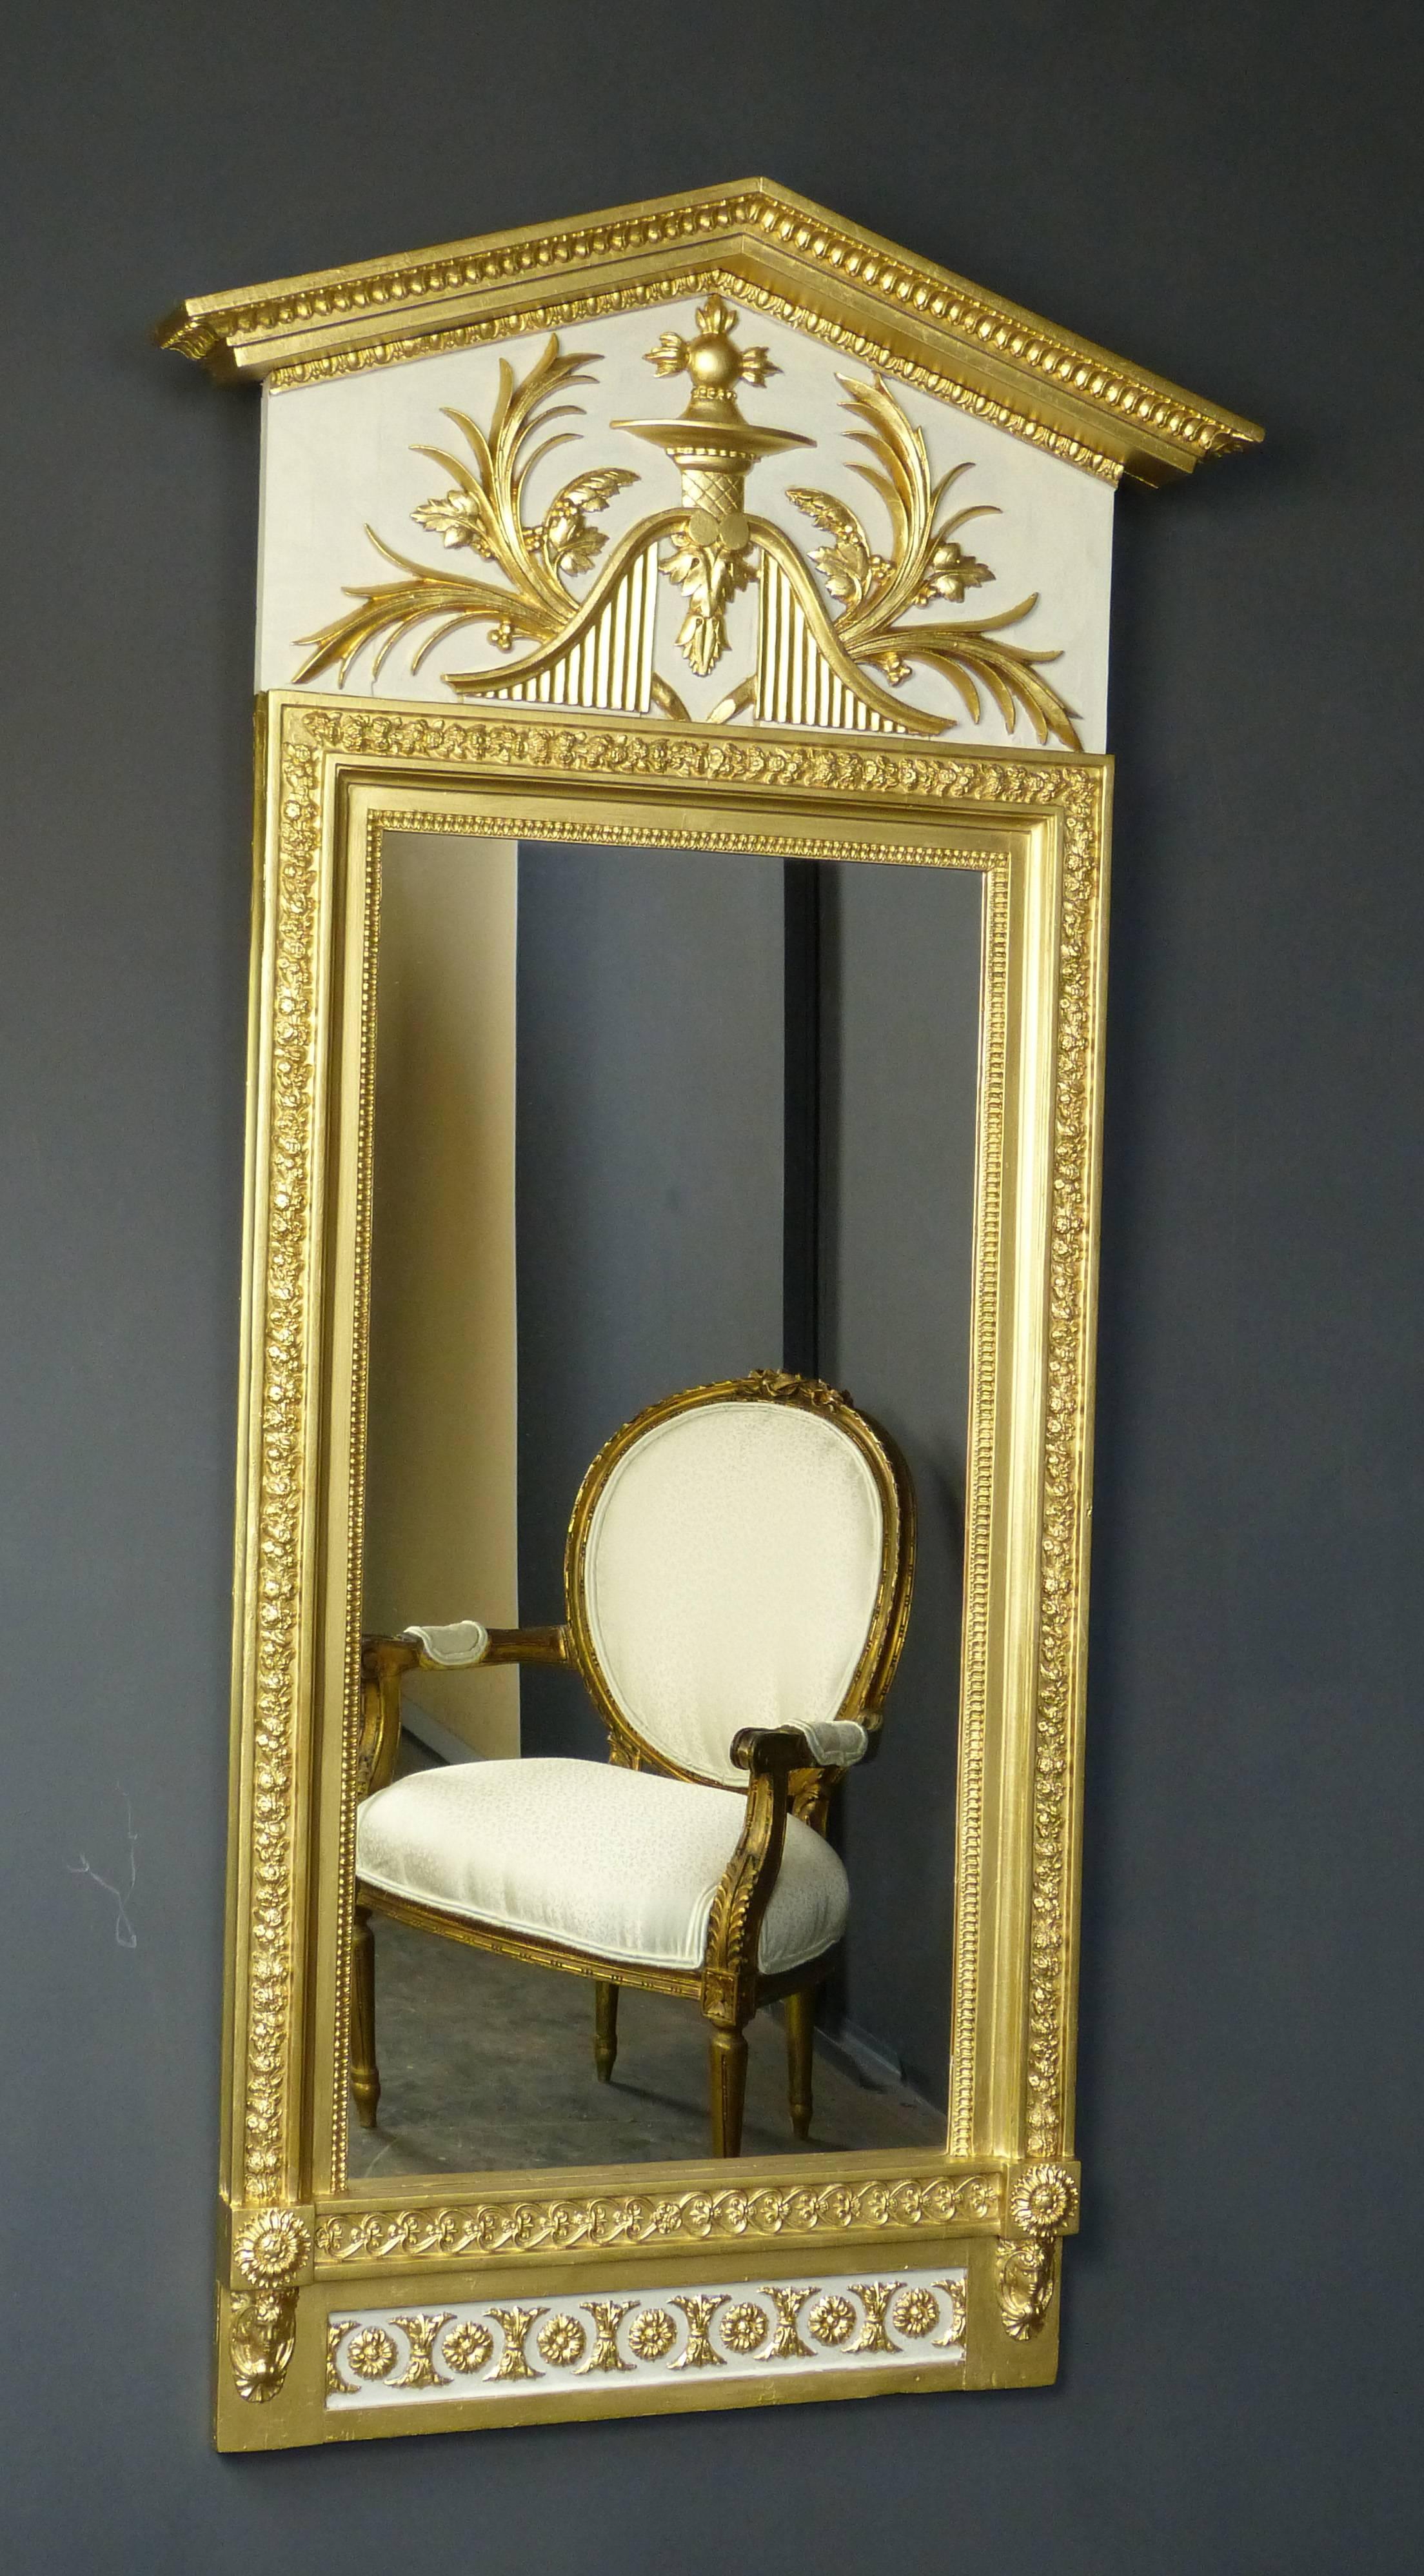 Fine early 19th century Gustavian mirror of architectural form, bearing label verso 'Jon Frisks', Swedish master mirror maker, parcel-gilt and painted over various carved wood designs of the Empire period during its transition to Biedermeier.

Jonas